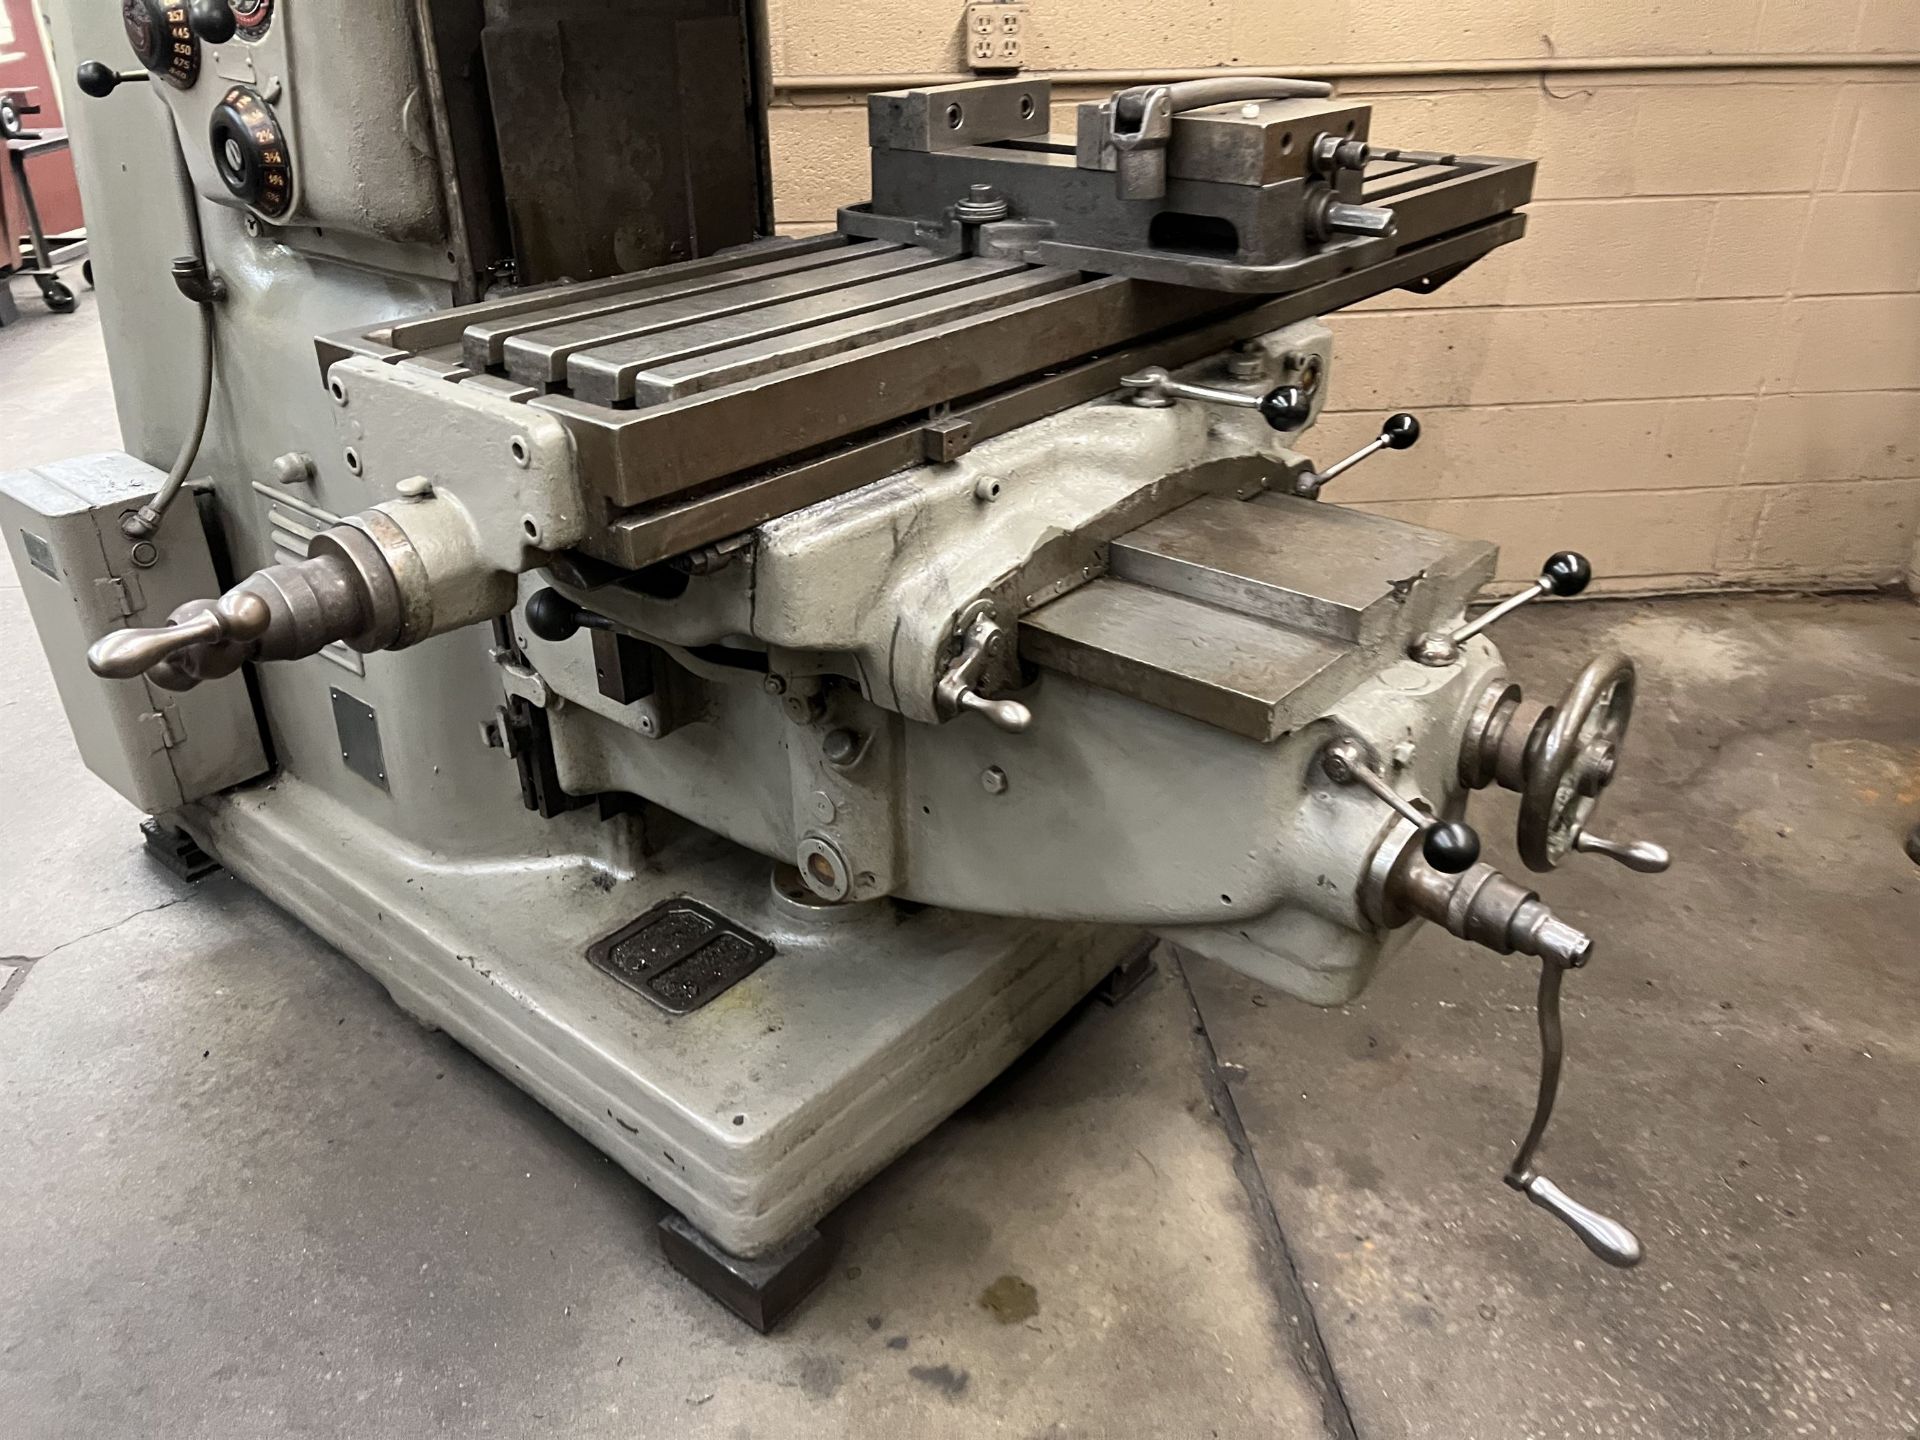 CINCINNATI No. 3 Vertical Knee Milling Machine, s/n 4A3V1R-5, 10" x 54" Table, 18-1300 RPM (This lot - Image 3 of 9